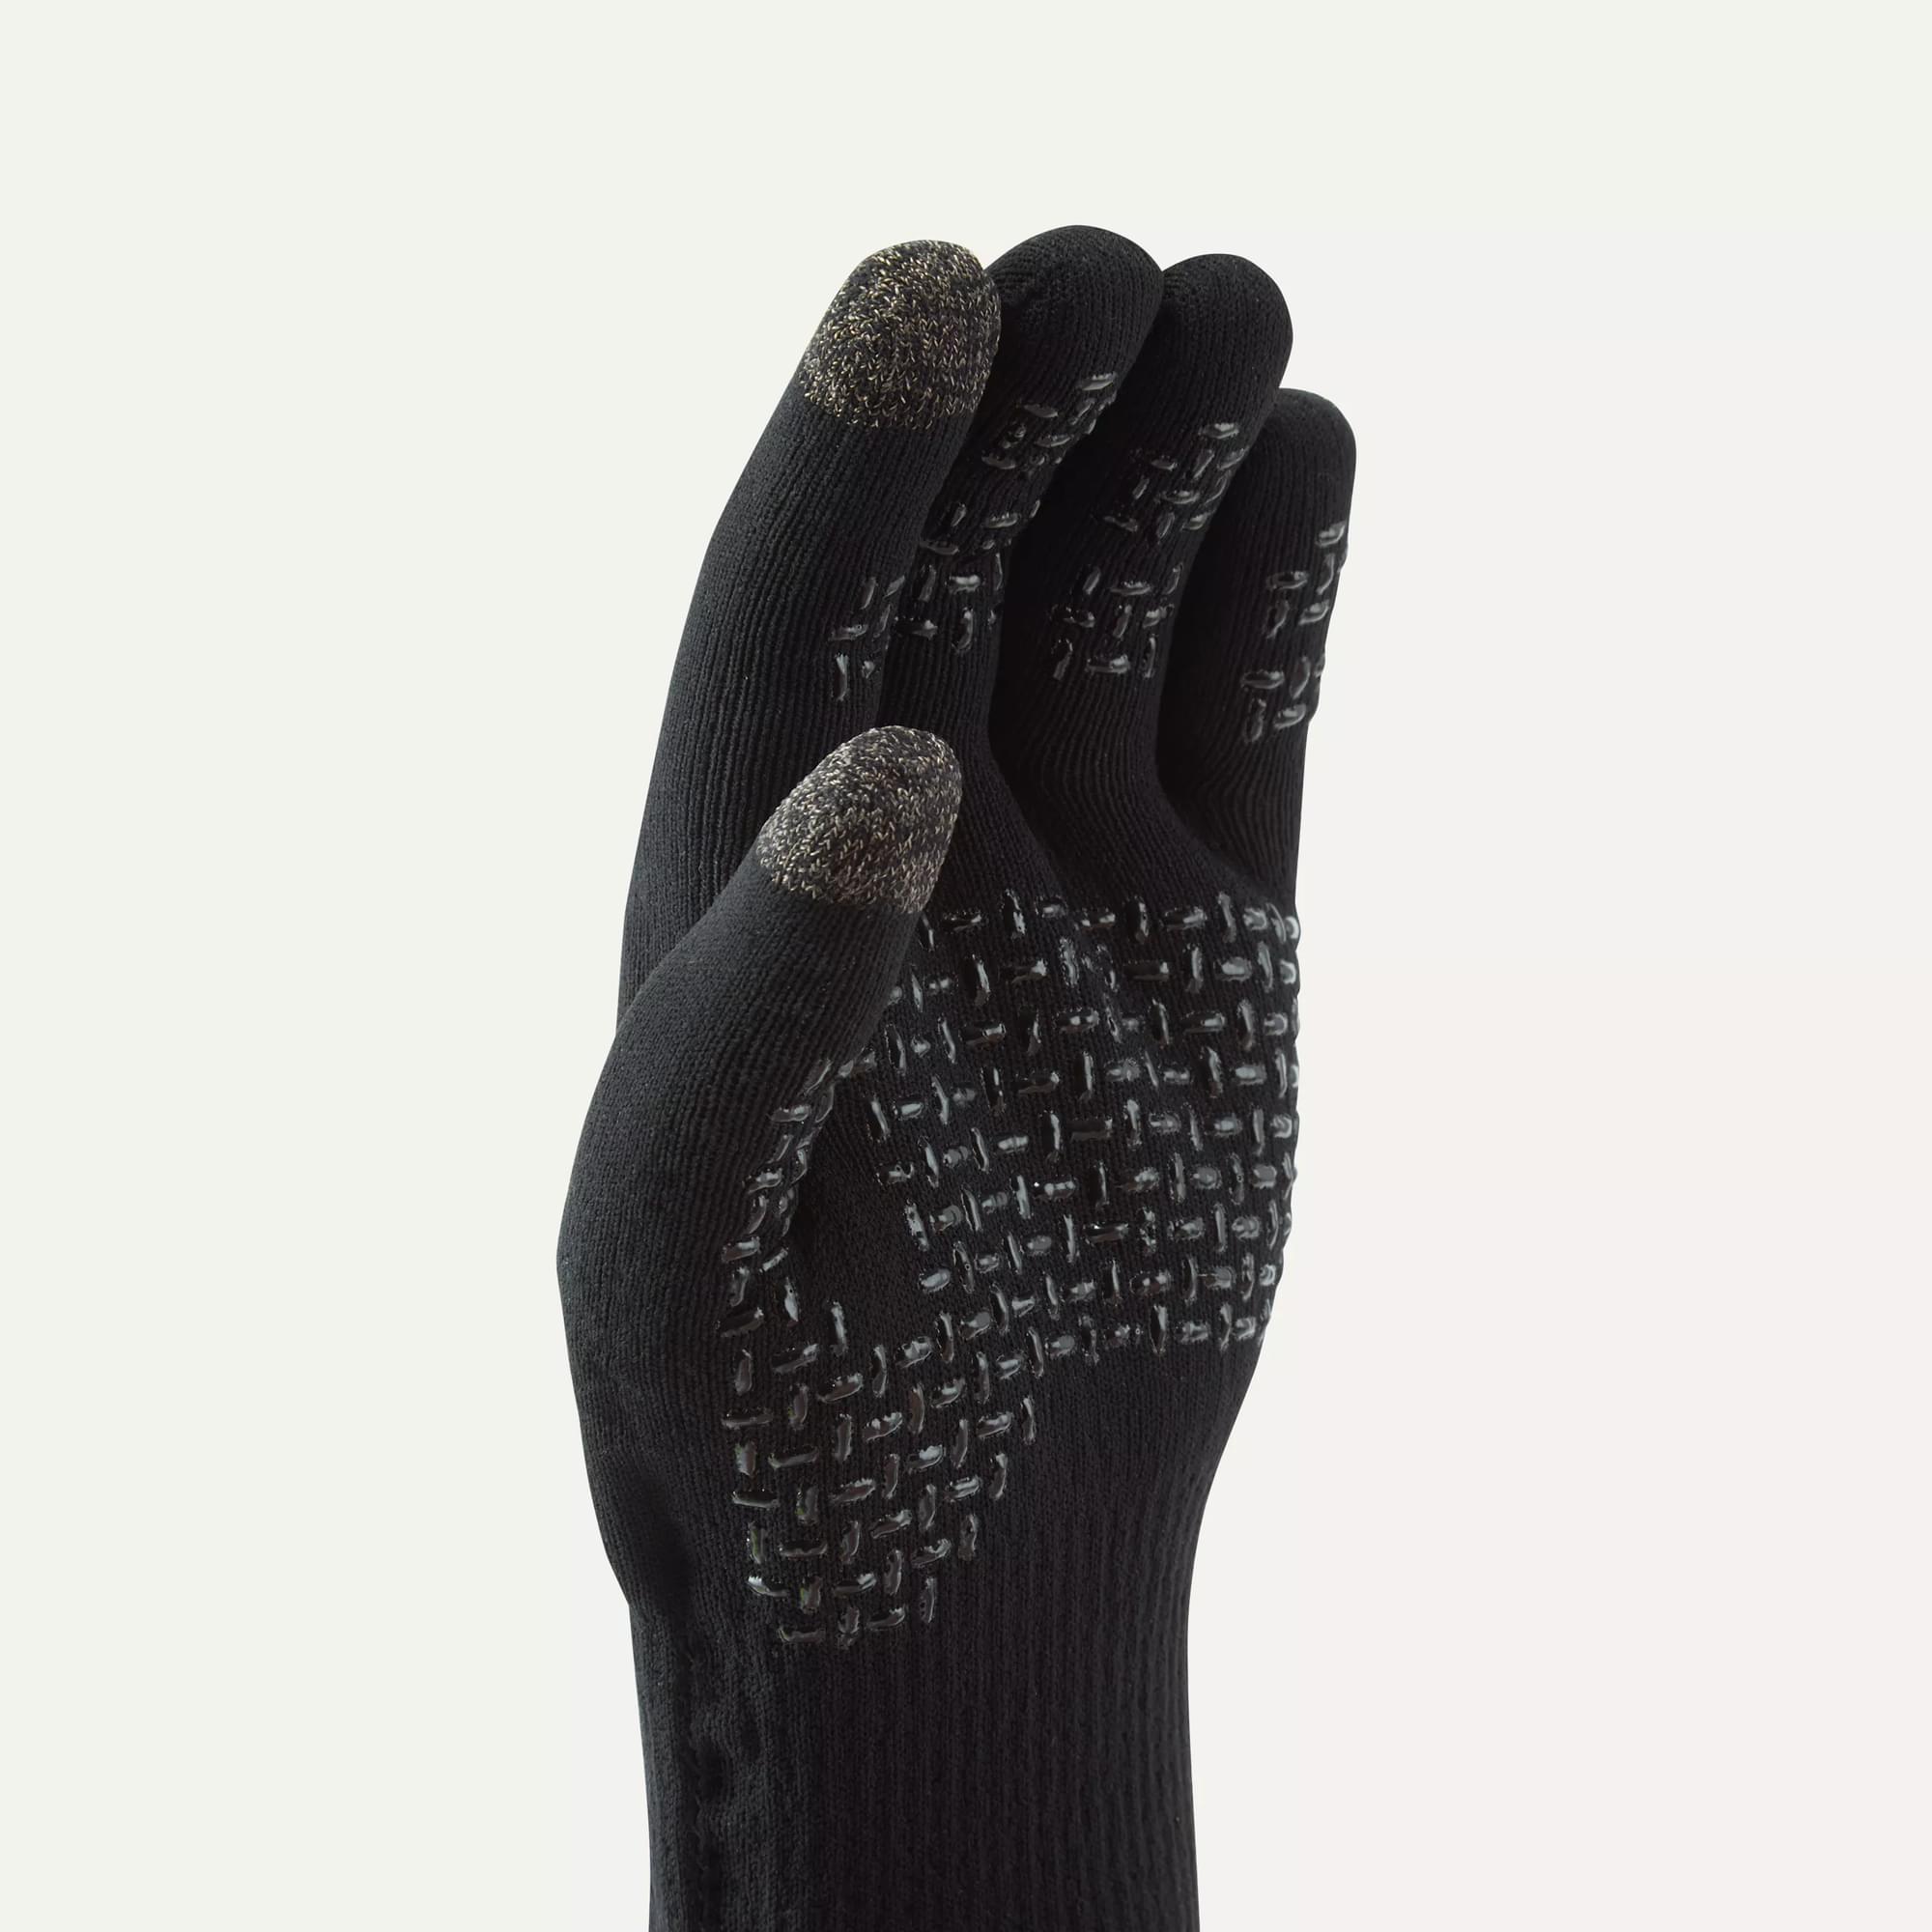 Sealskinz Anmer Waterproof All-Weather Ultra Grip Knitted Gloves - Large / Black